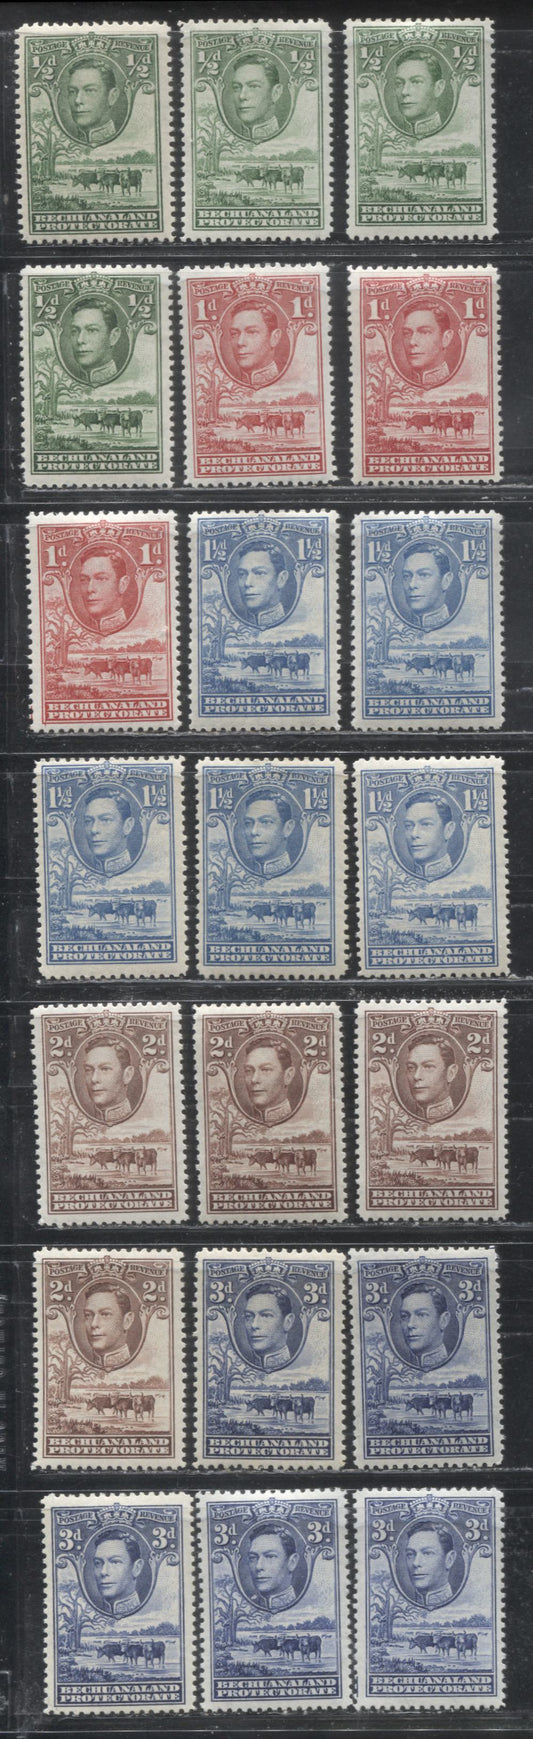 Bechuanaland Protectorate SG#118-122 1/2d Green - 3d Blue 1938-1952 Baobab Tree and Cattle Pictorial Definitive Issue, a F/VF LH Short Set to 3d Including Both 1938 and Wartime Printings